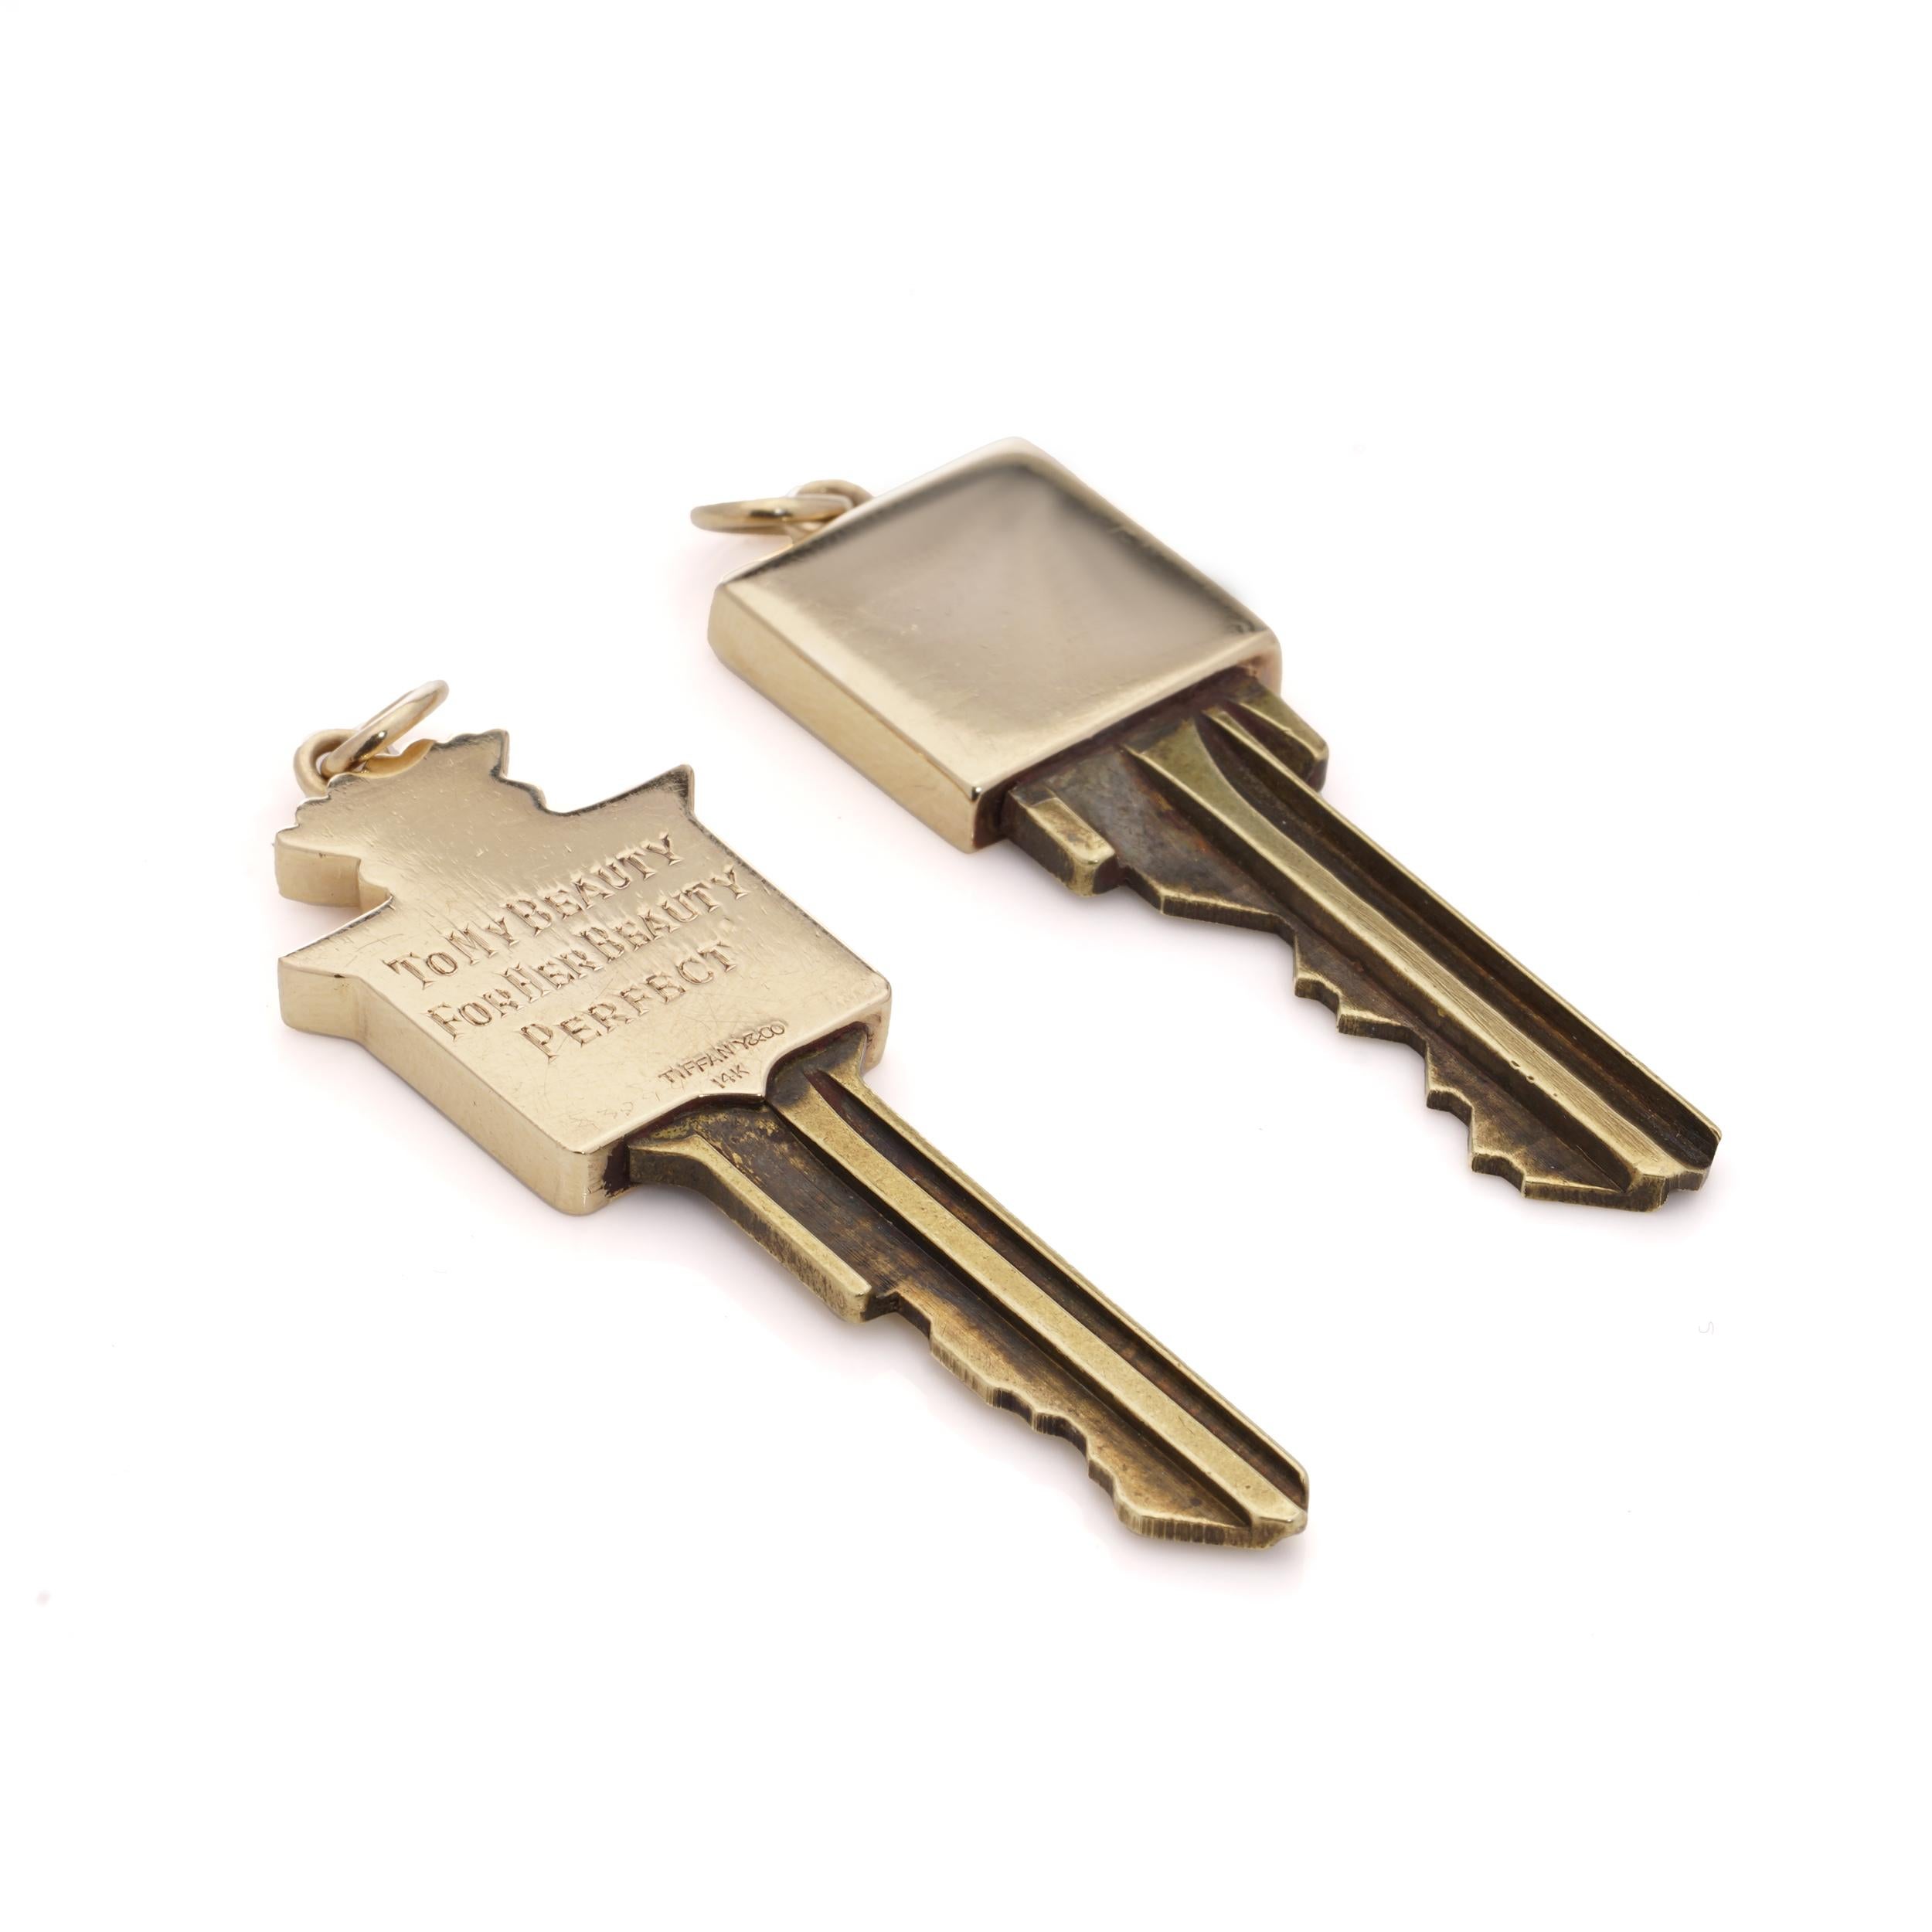 Two gold mounted keys, one with Cadillac logo design finial, Tiffany & Co. 14kt. For Sale 5